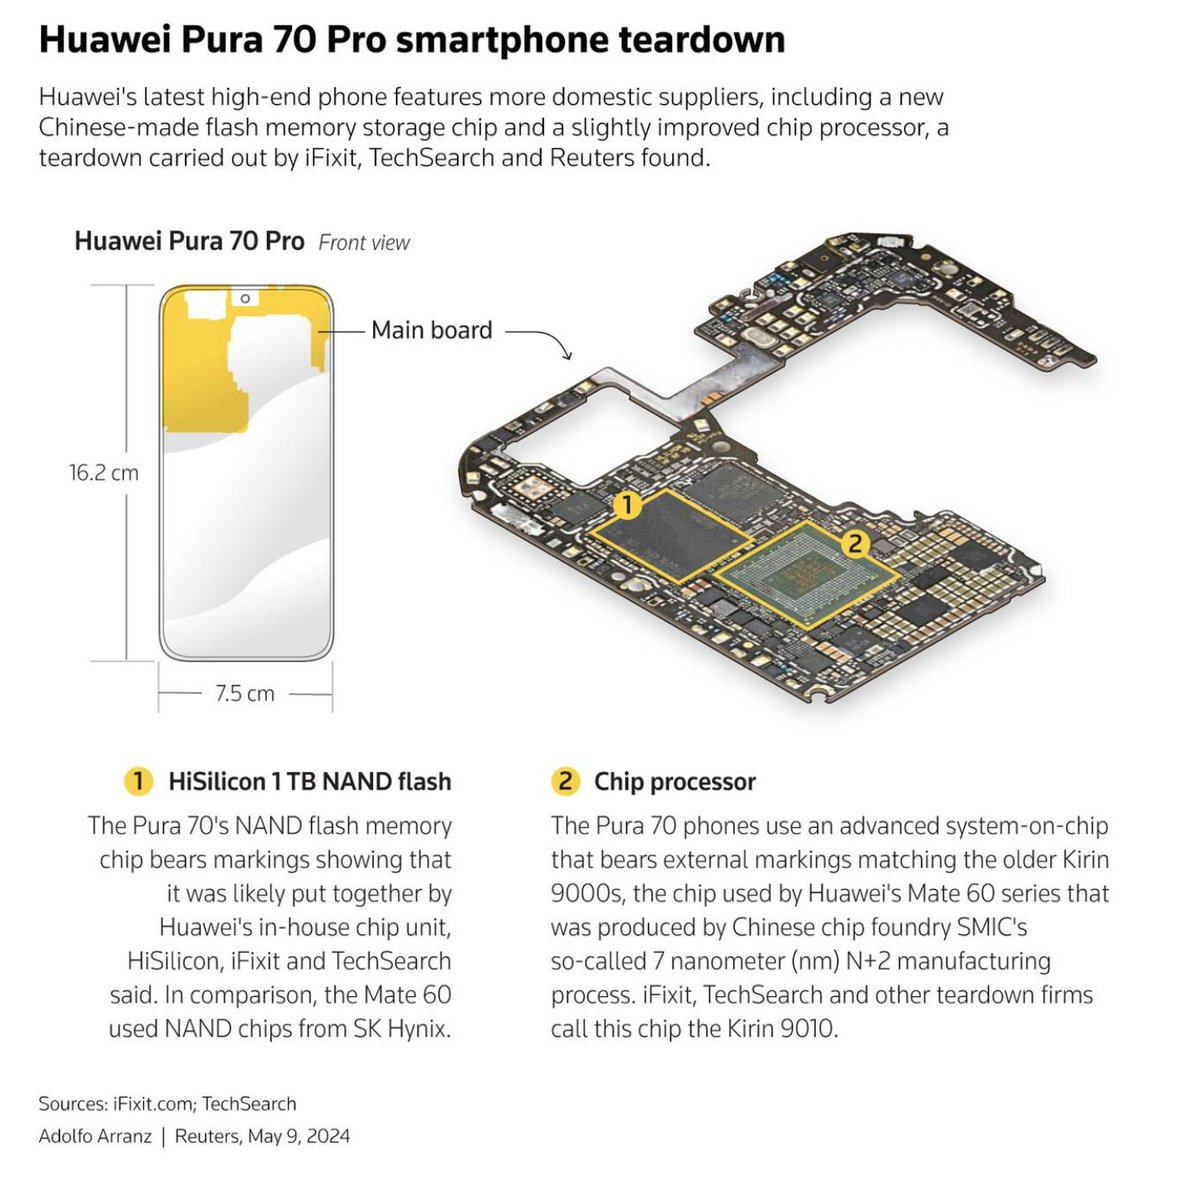 #Huawei's New 'Made-In-China' Smartphone Sources More Chips Locally Amid US Tech War

Soon will be made from all domestic parts.  What to sanction, then?

#China #techwar #chips #tech
@baoshaoshan
@thecyrusjanssen
@DOualaalou
@lajohnstondr
@PSTAsiatech
zerohedge.com/technology/hua…